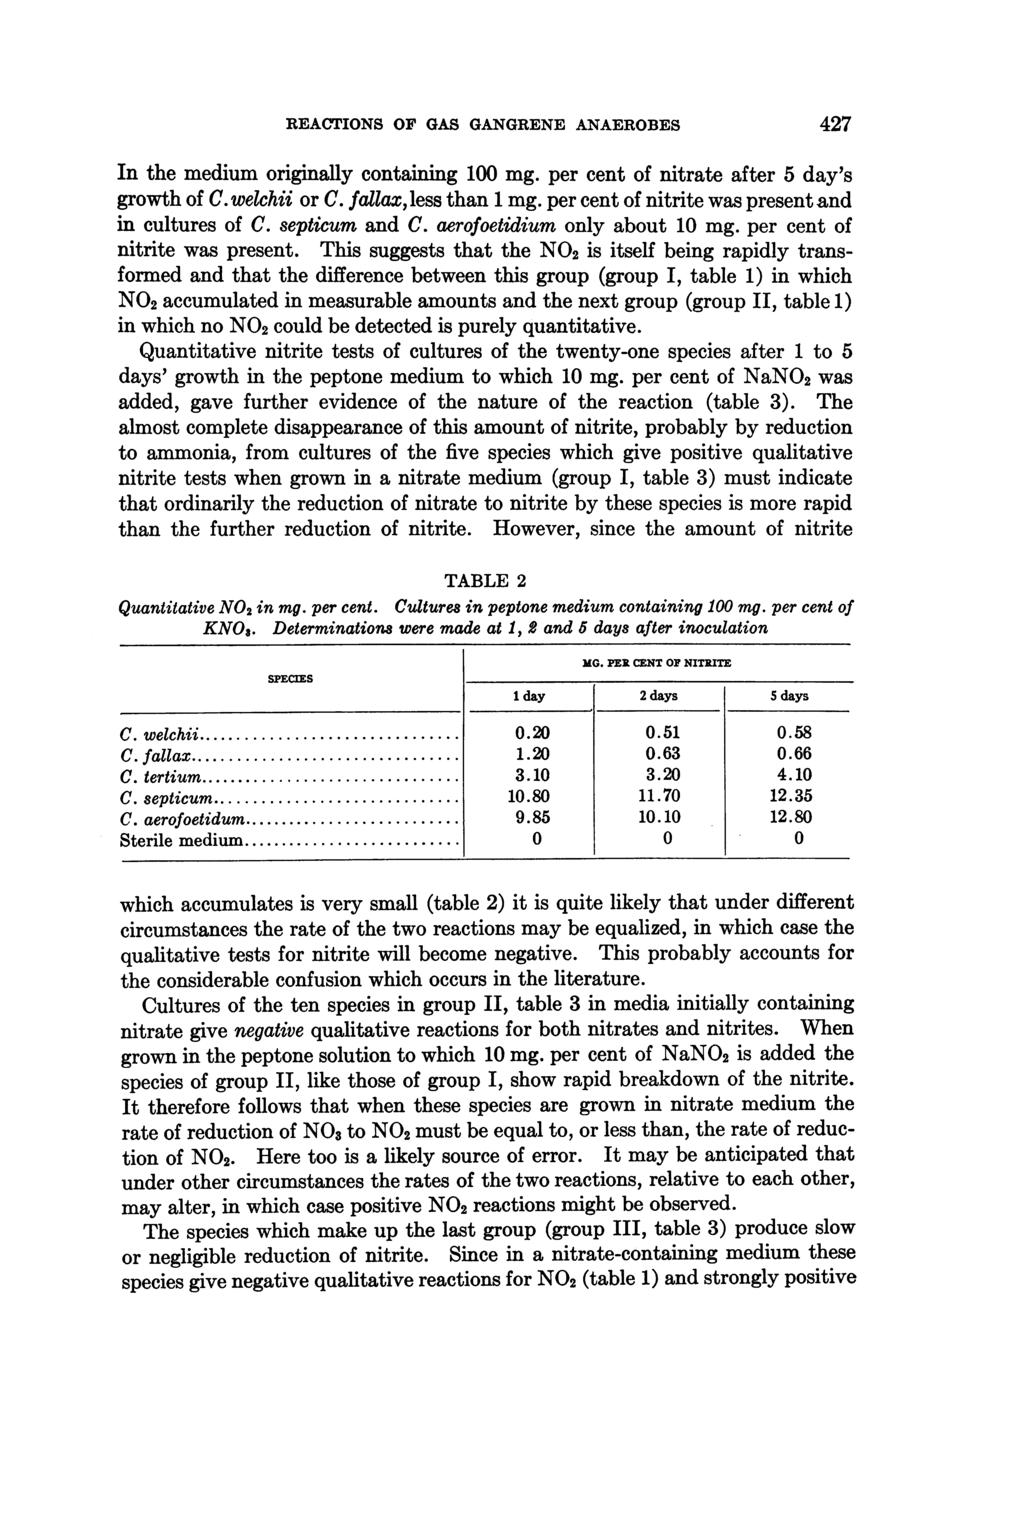 REACTIONS OF GAS GANGRENE ANAEROBES 2 In the medium originally containing 100 mg. per cent of nitrate after 5 day's growth of C.welchii or C. fallax, less than 1 mg.